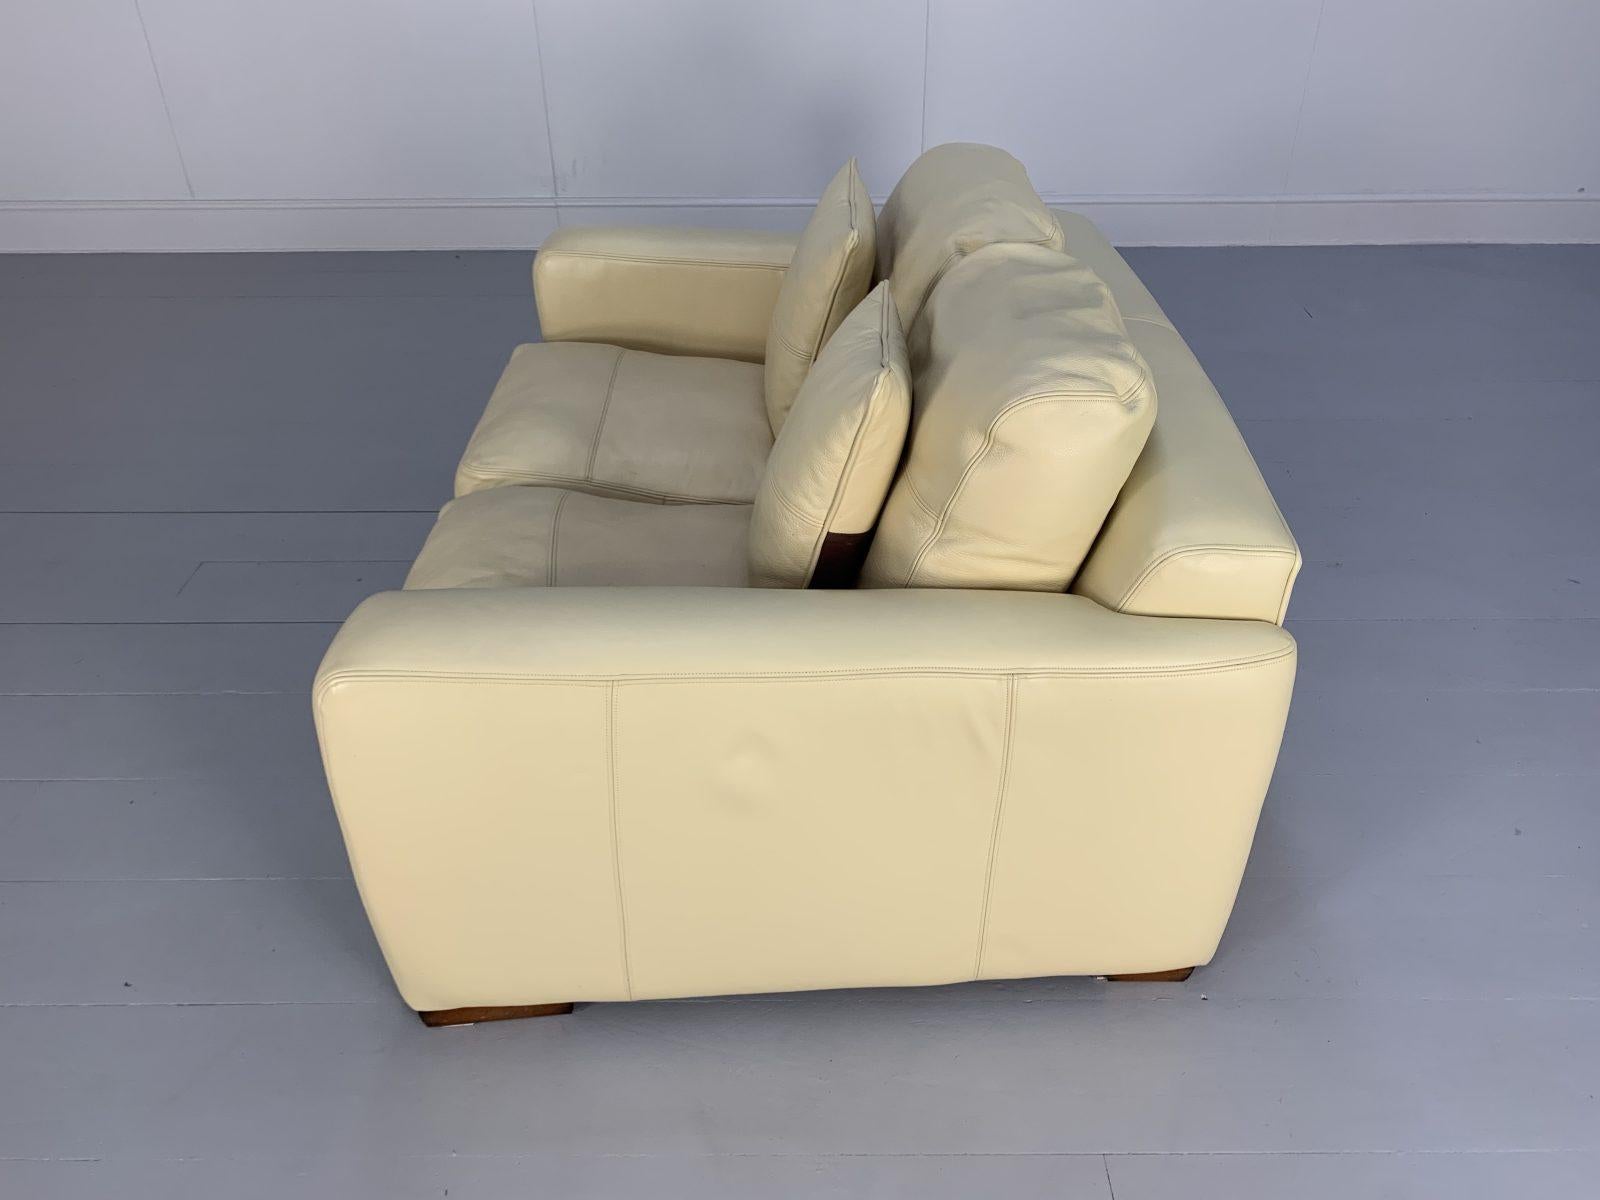 Duresta “Panther” 2-Seat Sofa – in Cream Leather For Sale 4